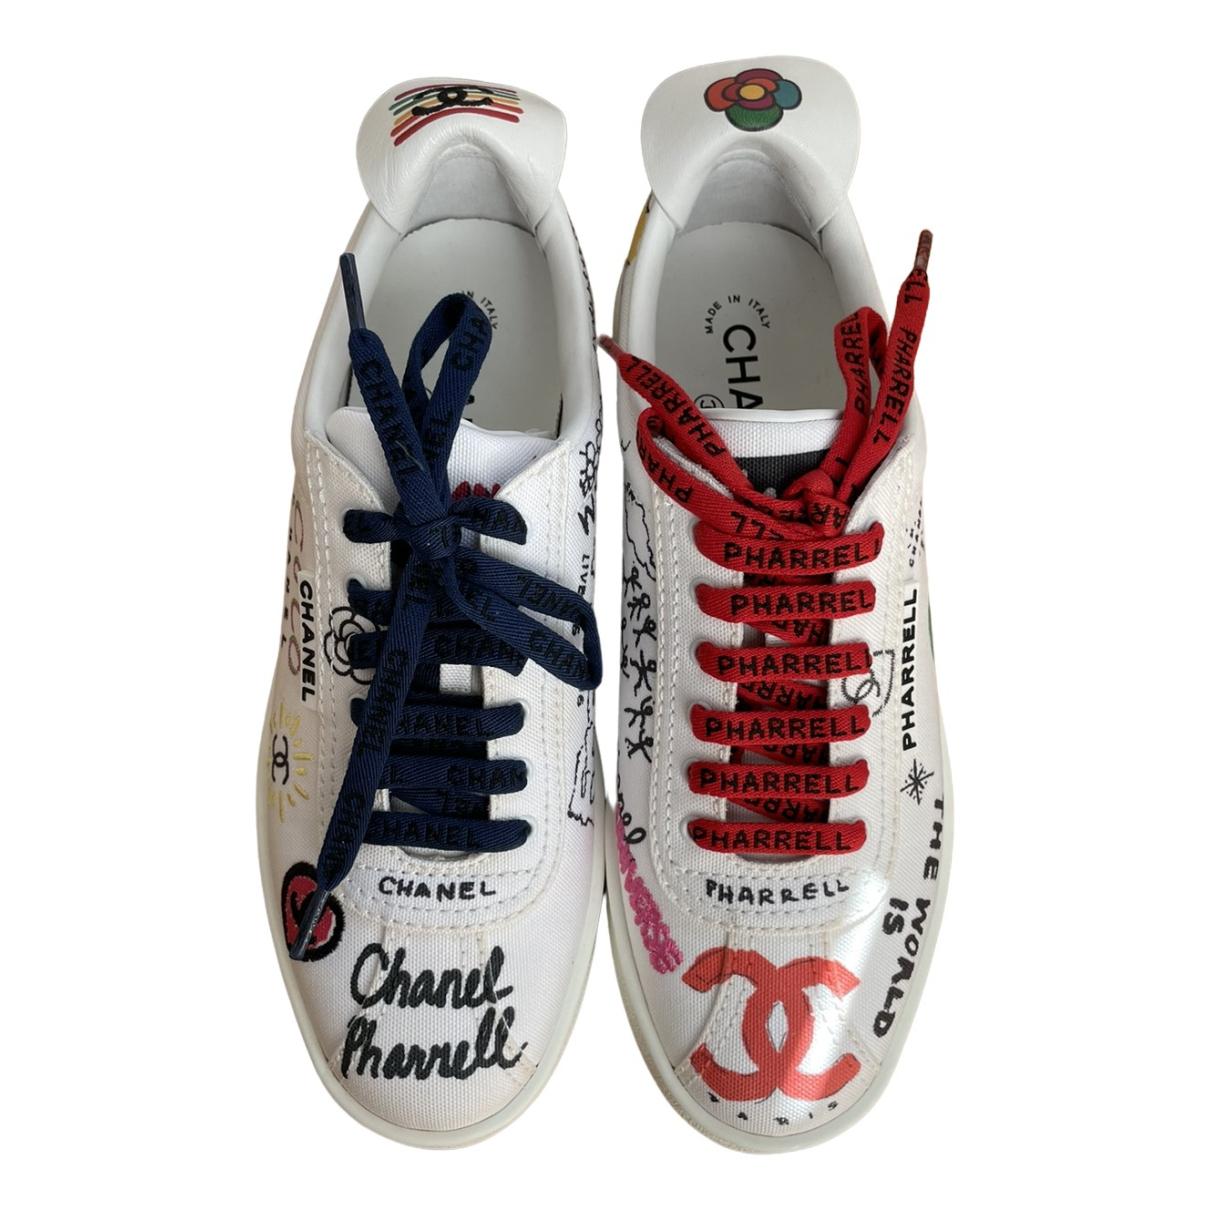 Chanel - Pharrell Williams x Chanel SS19 Capsule Collection Loafers Mules  Mules - Size: FR 40.5 in Italy